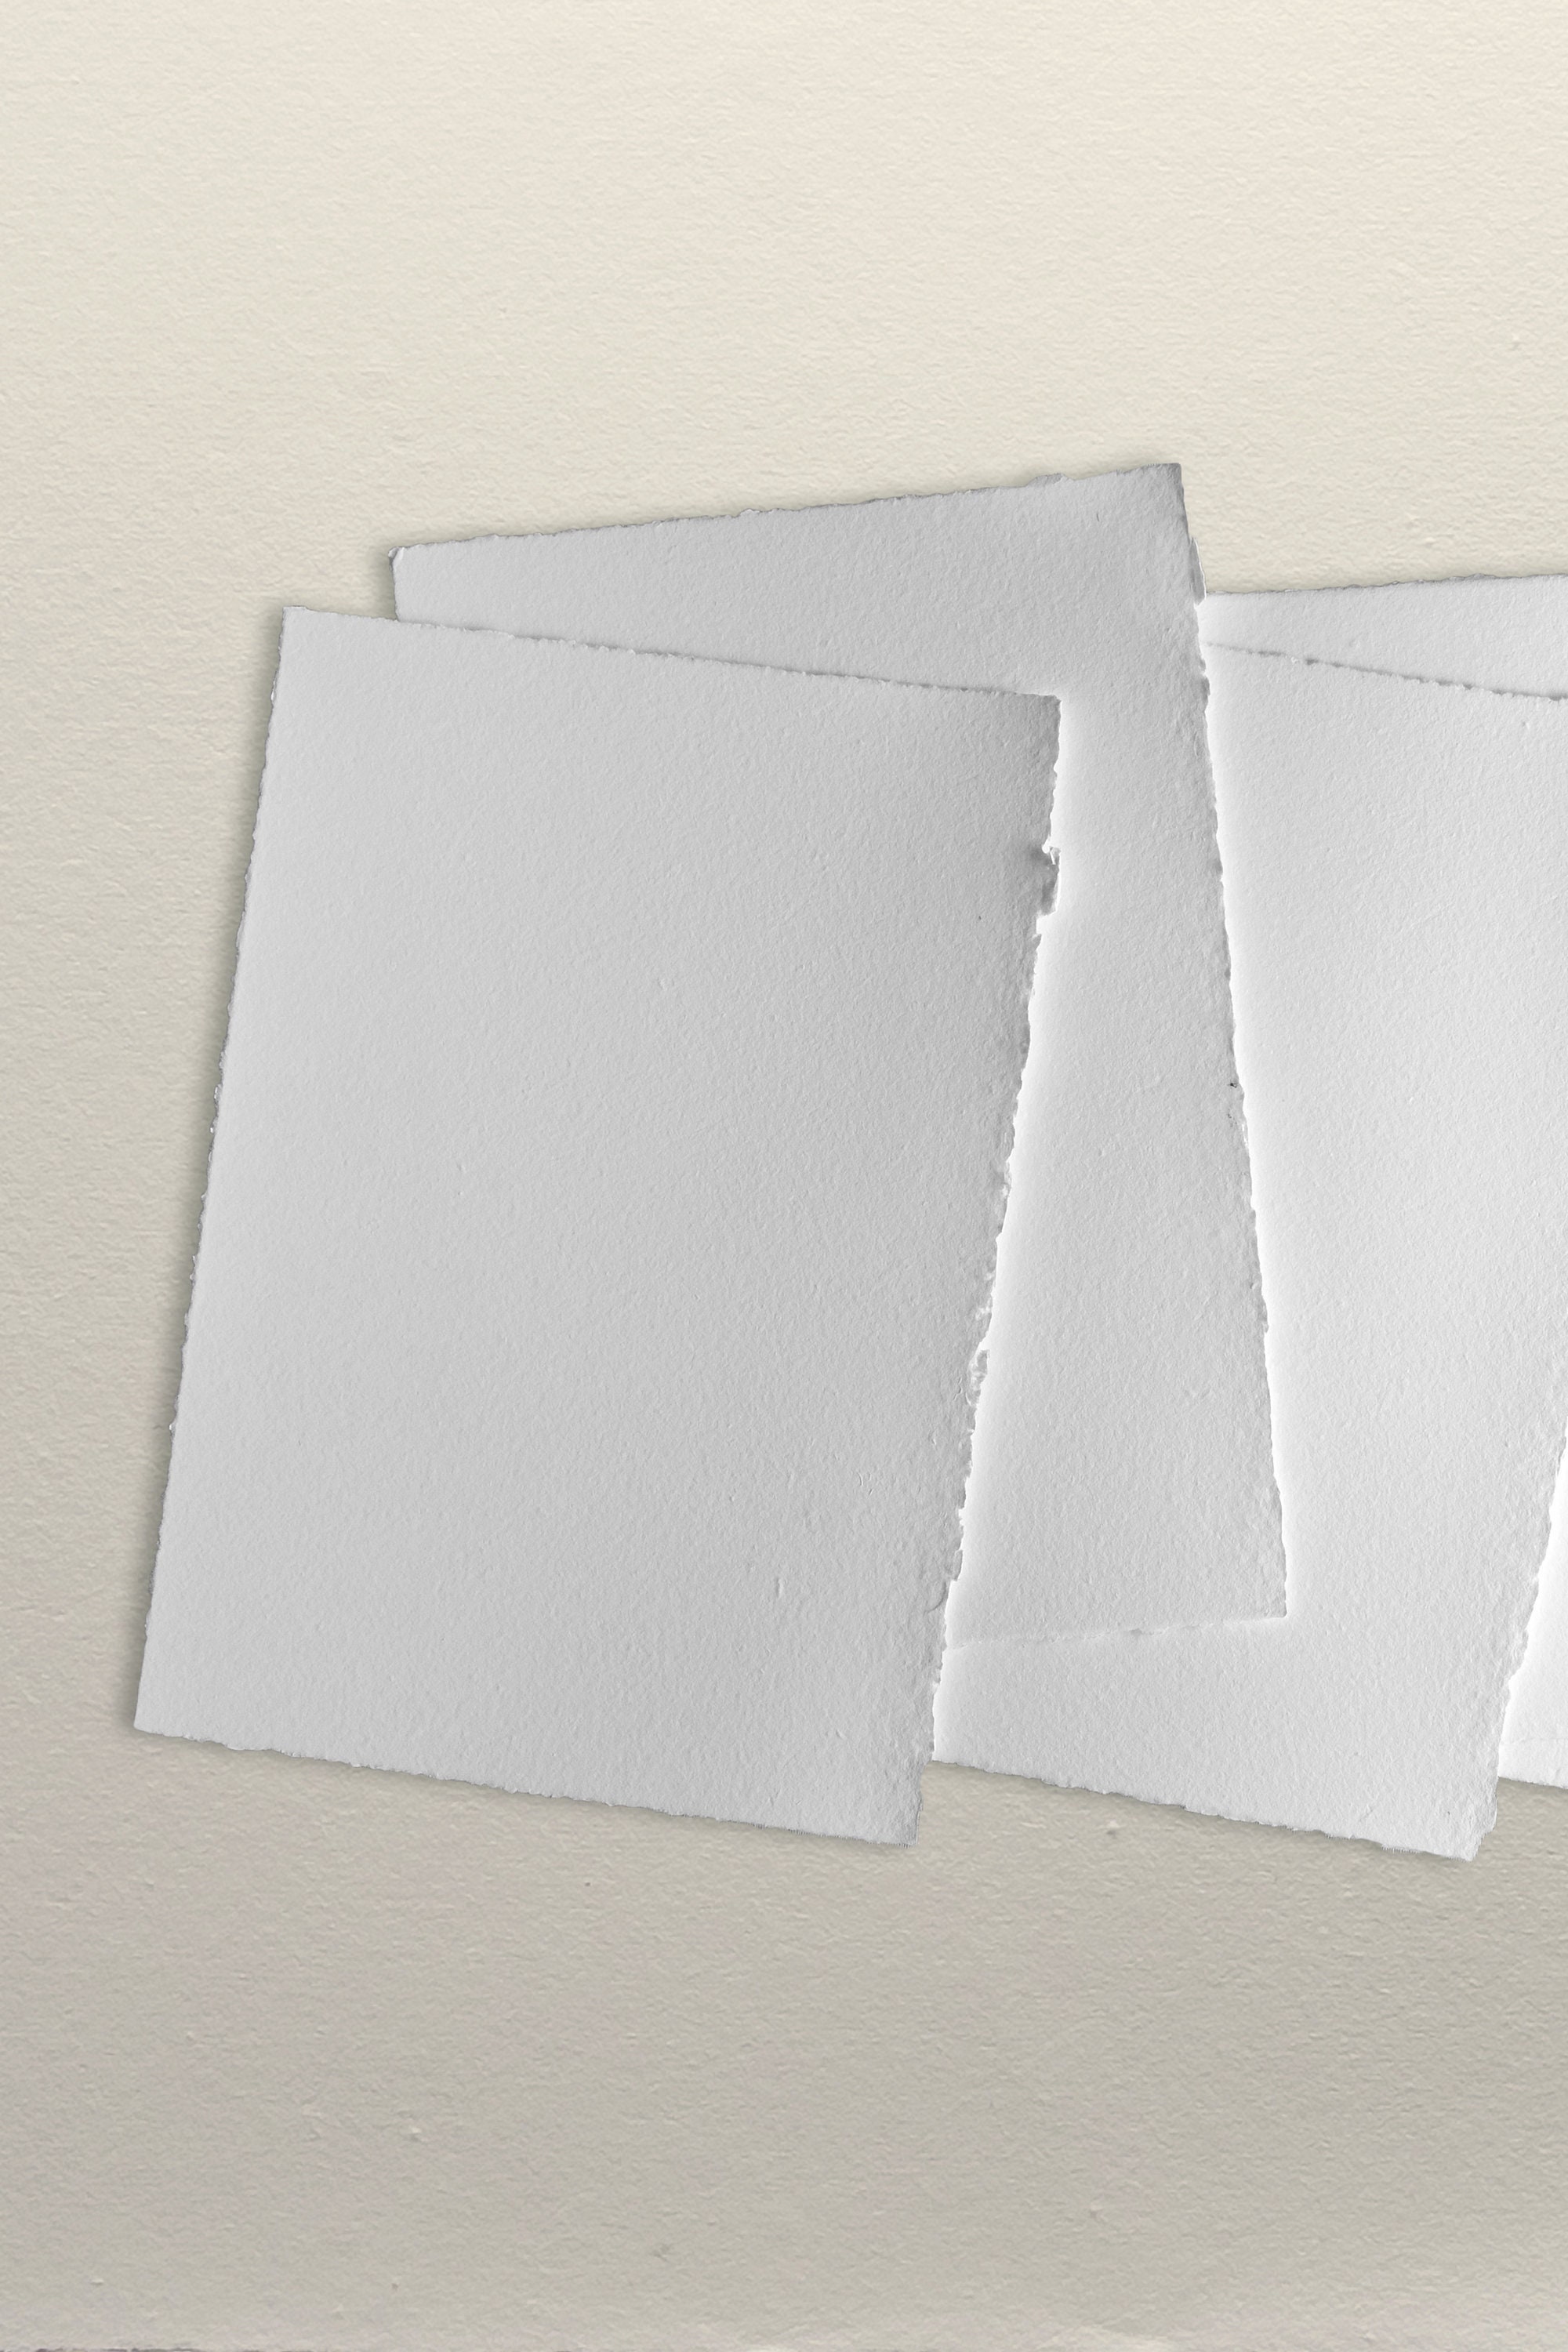 A3 White Cardstock - Bulk and Wholesale - Fine Cardstock